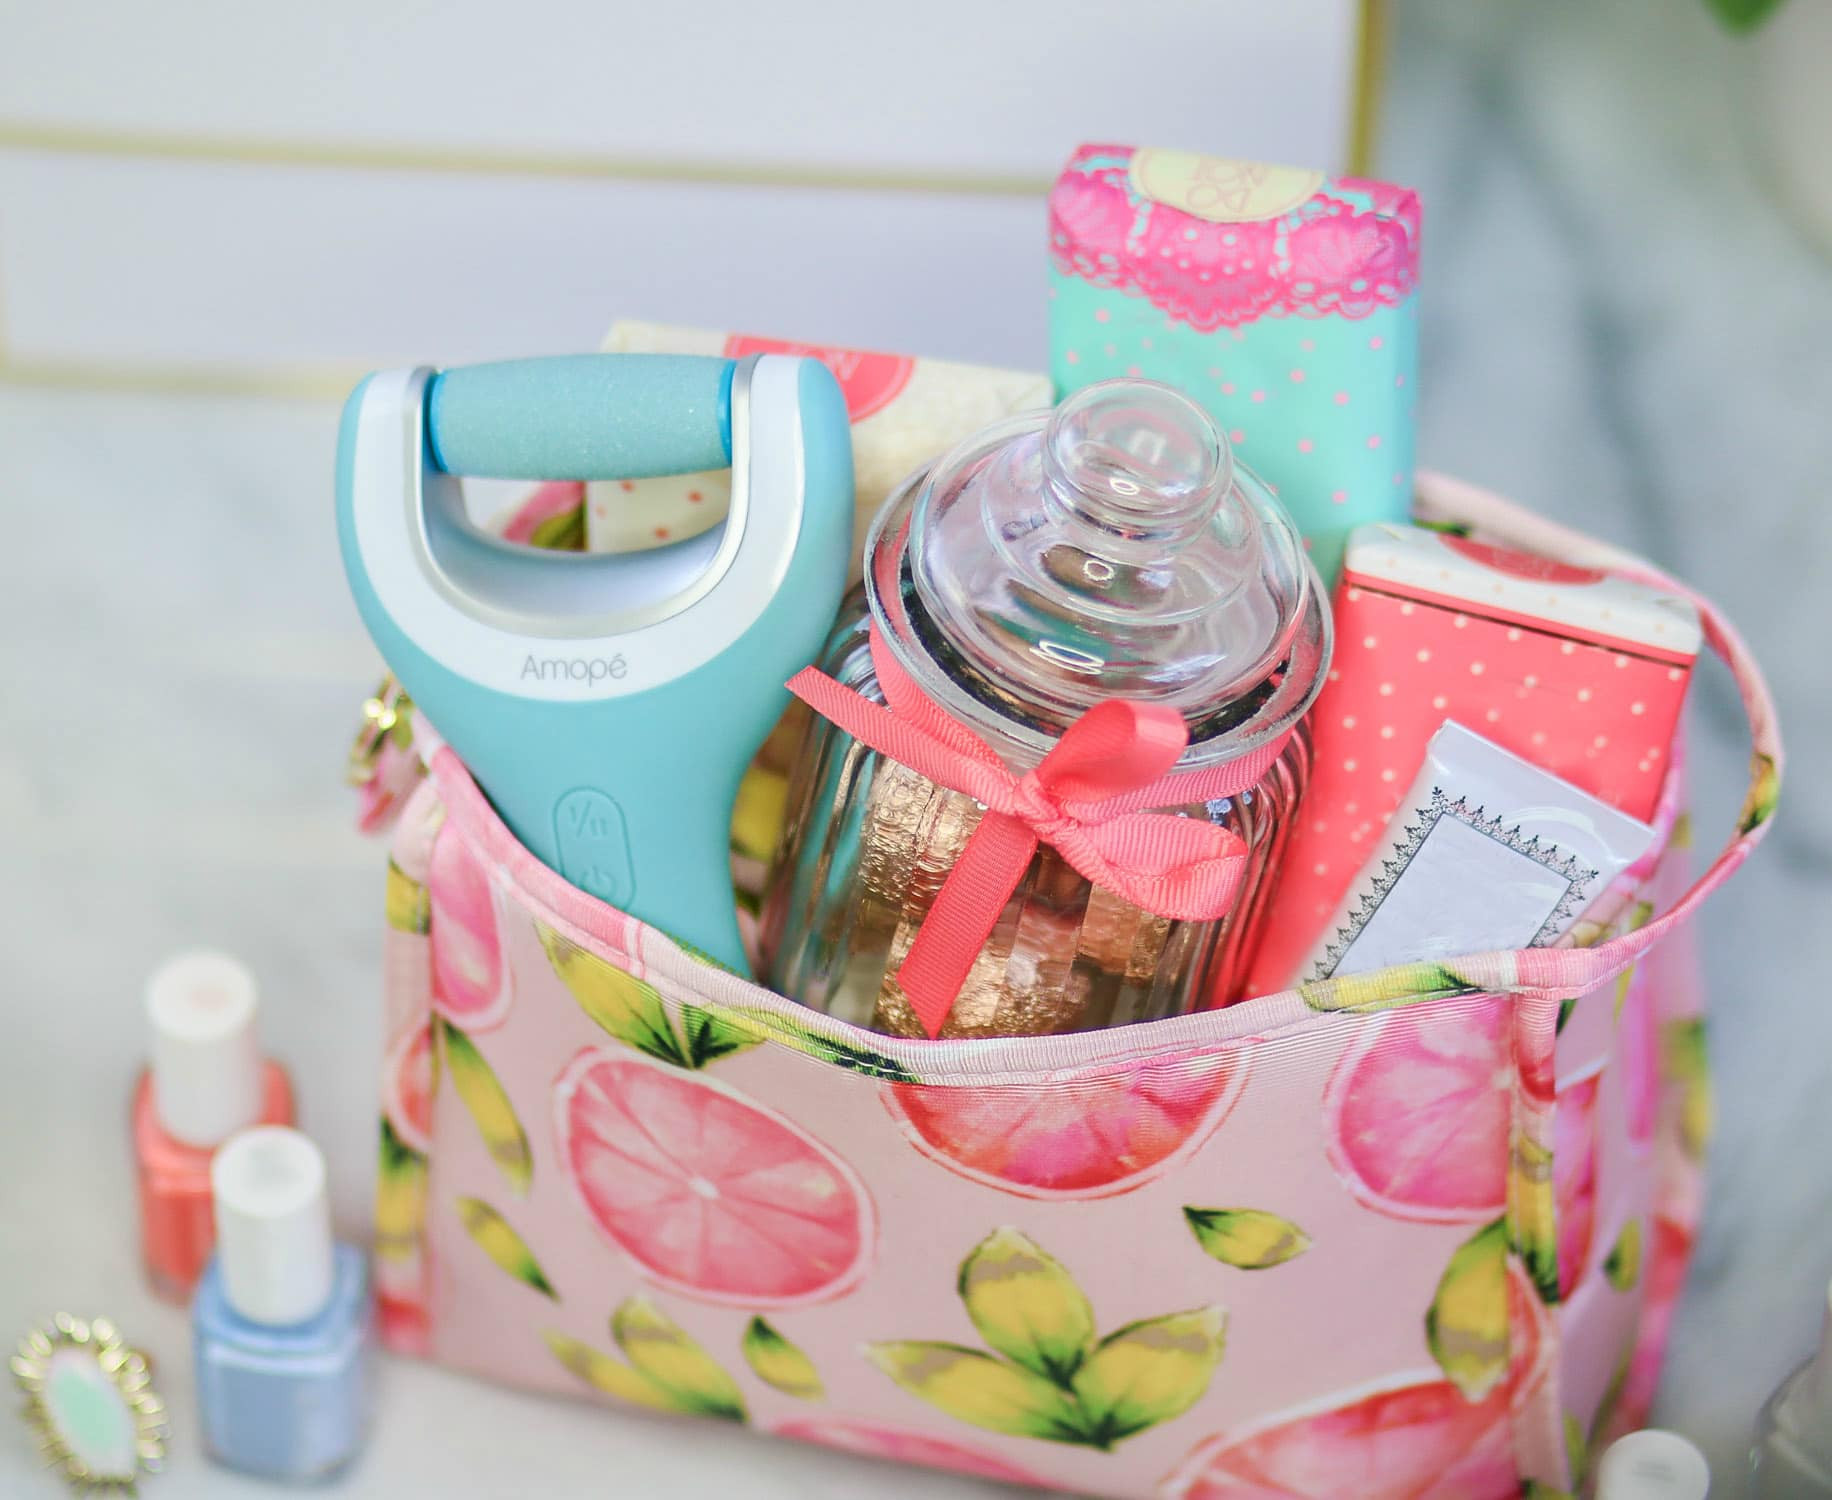 Cute Gift Basket Ideas For Girlfriend
 Cute Gift Ideas for Your Friends